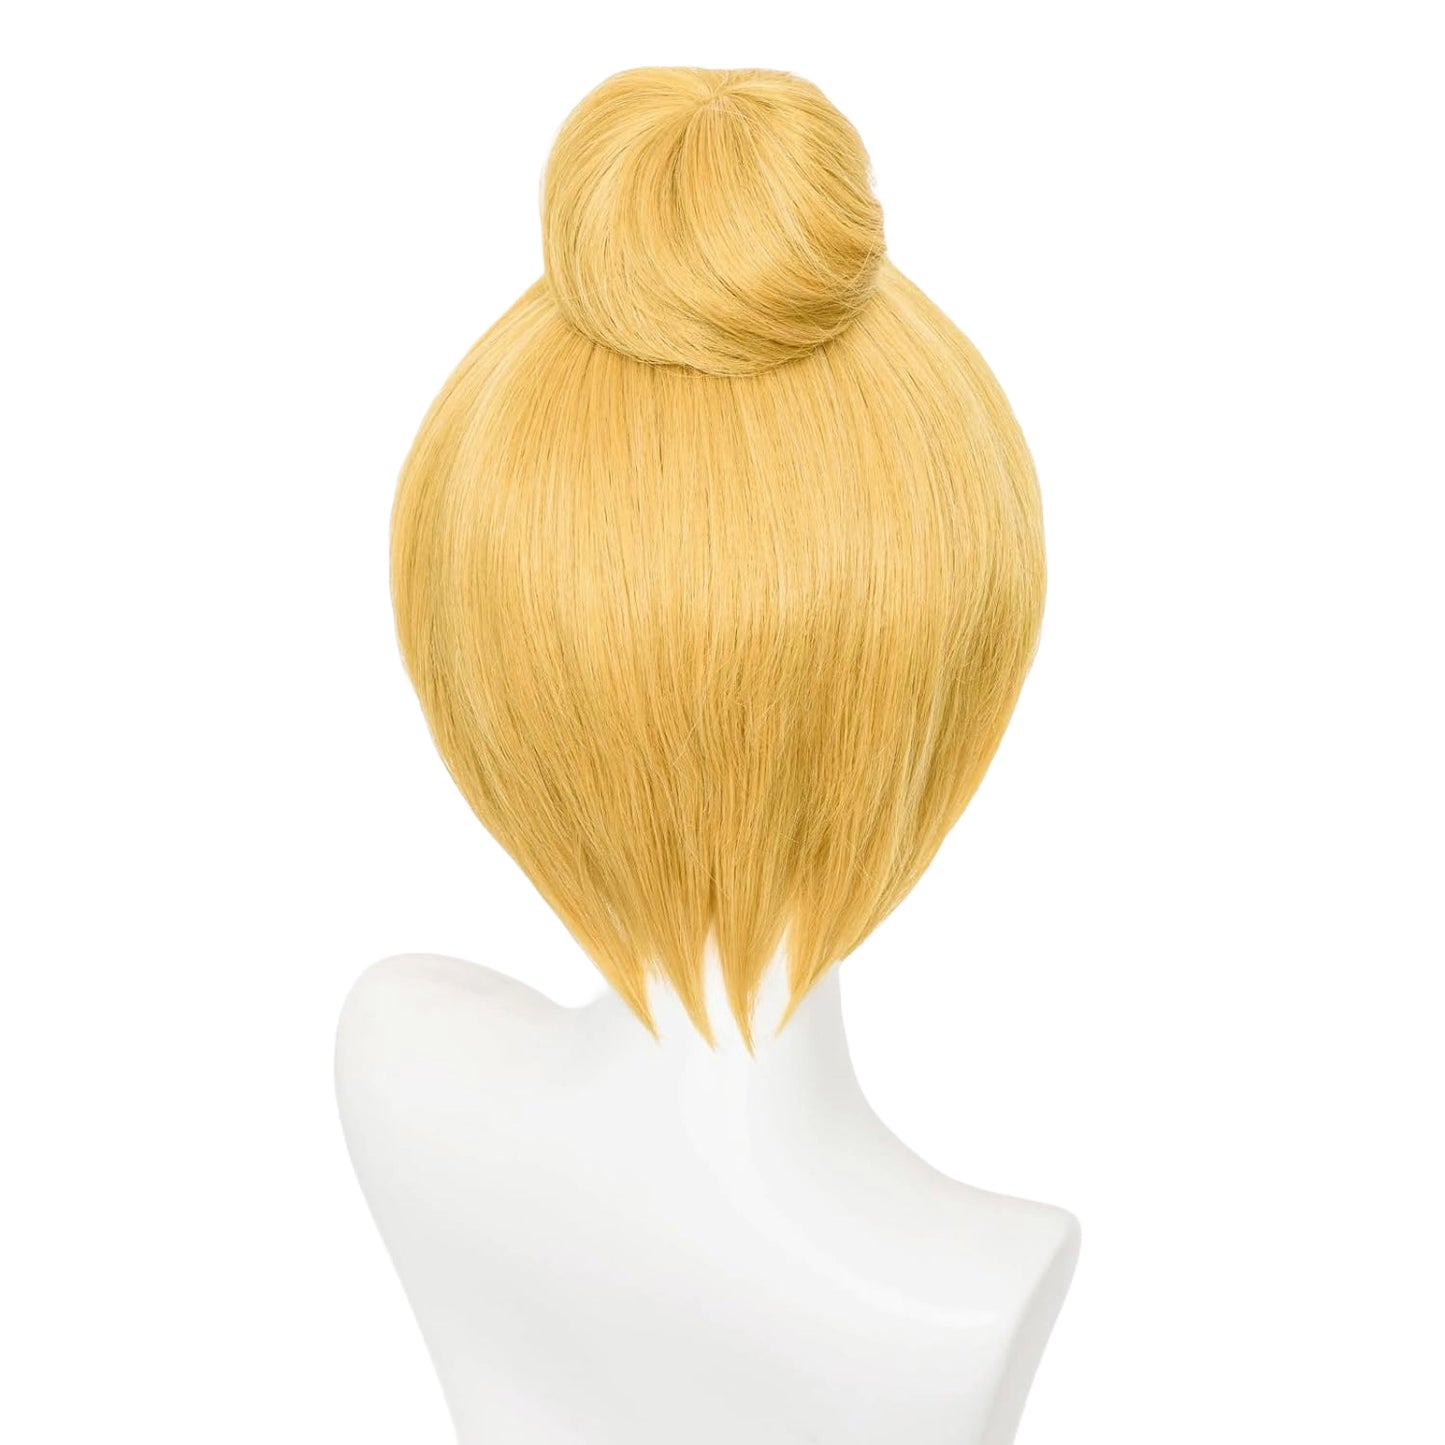 Tinker Bell Blonde Cosplay Wig with Bun